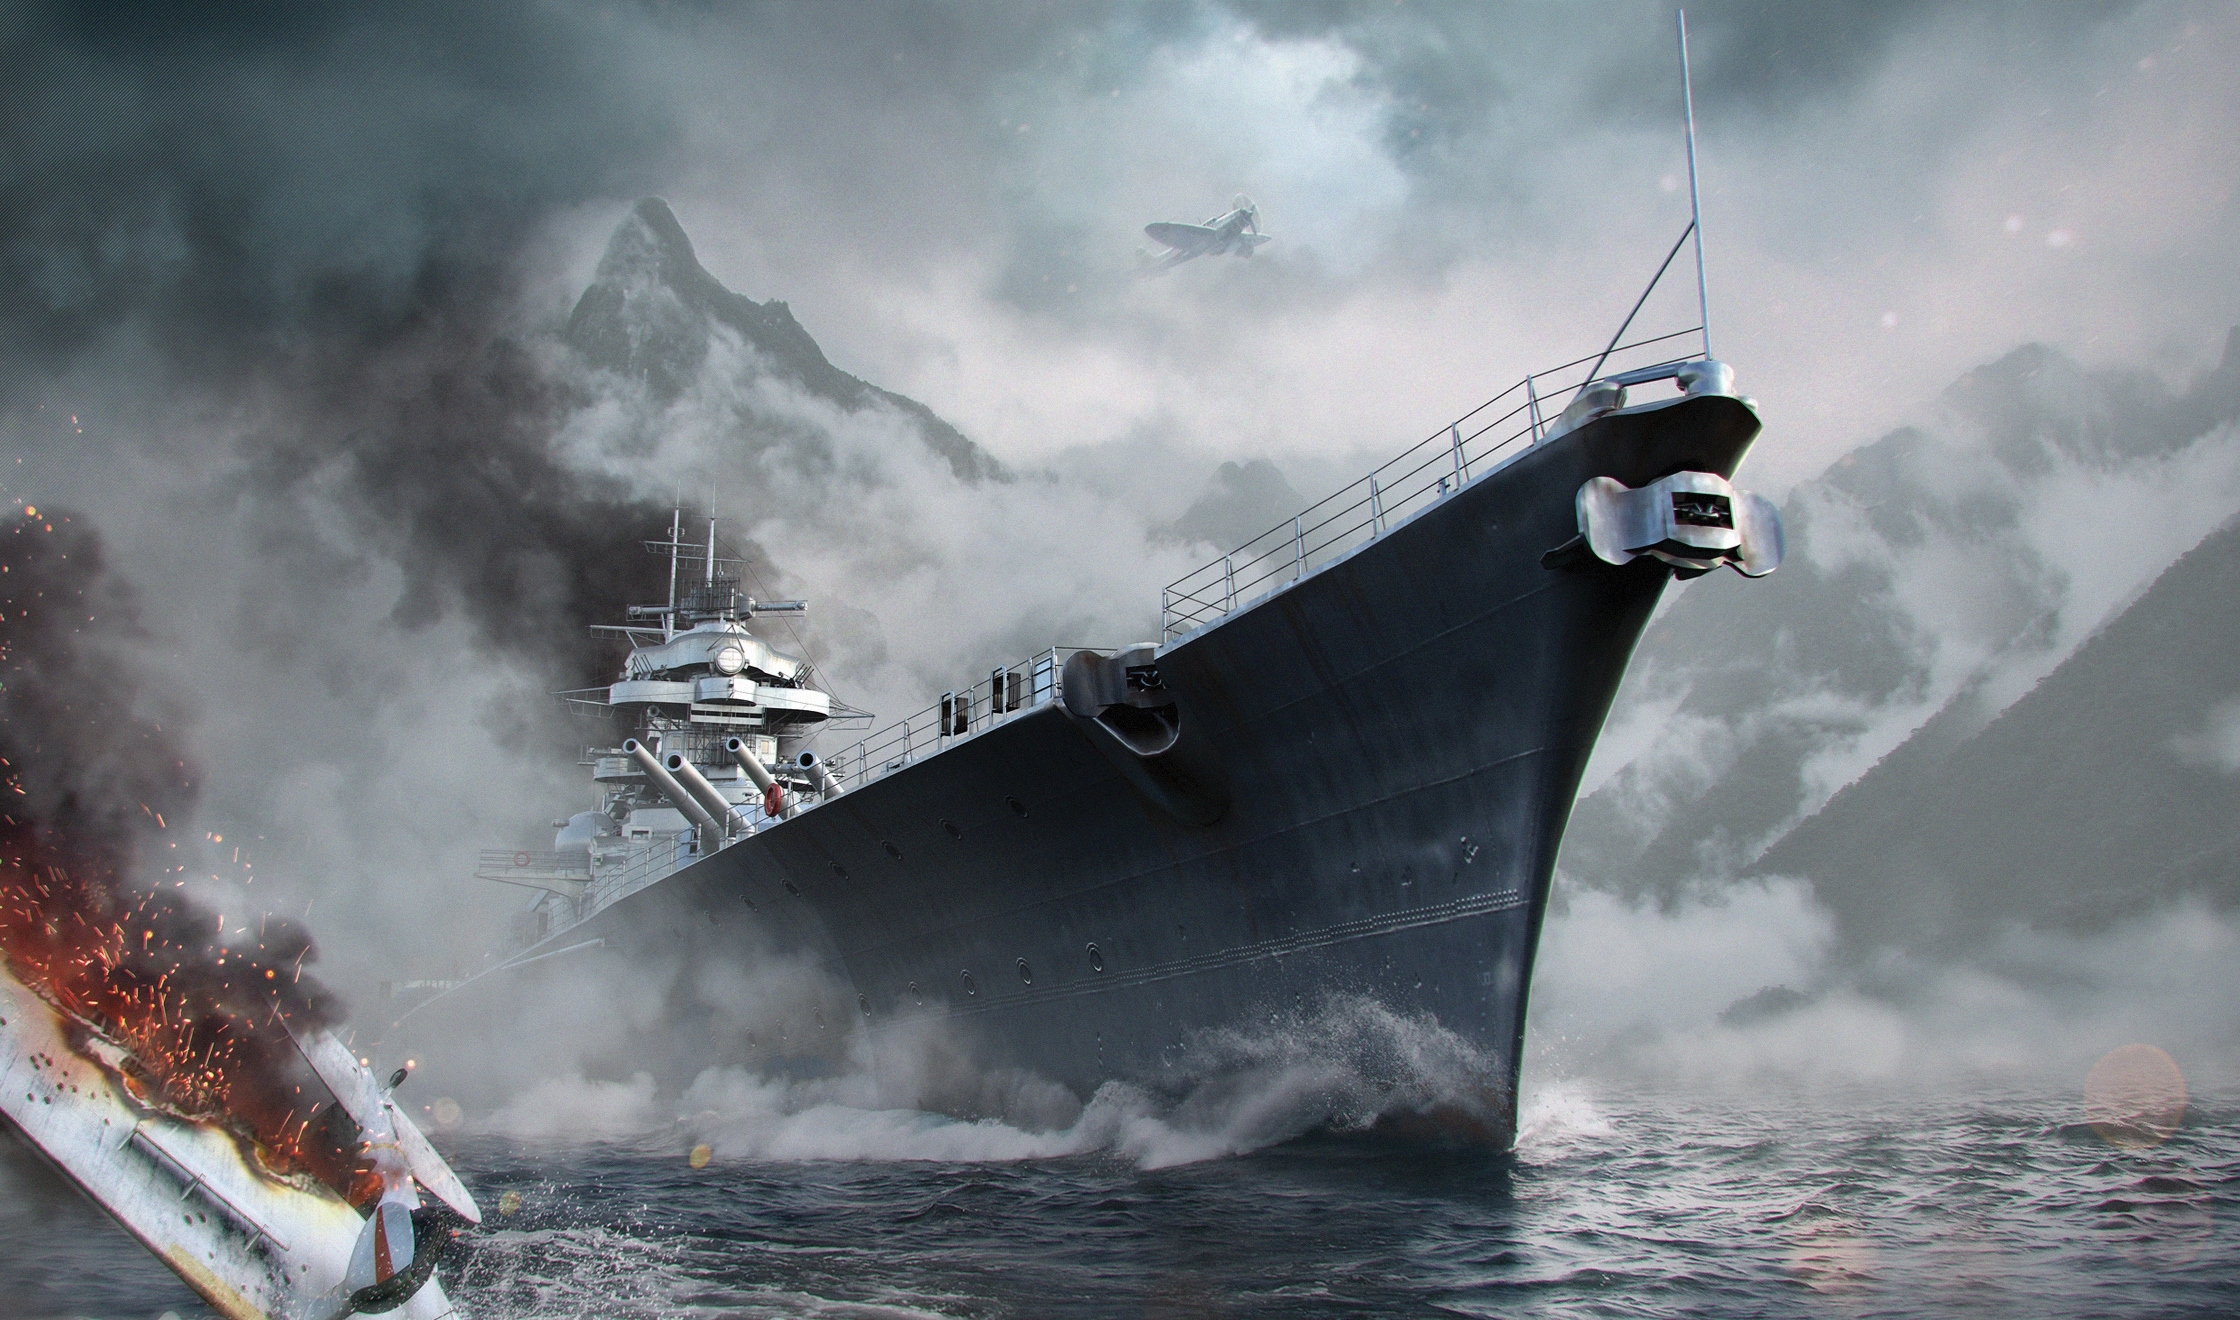 world of warships blitz pc download